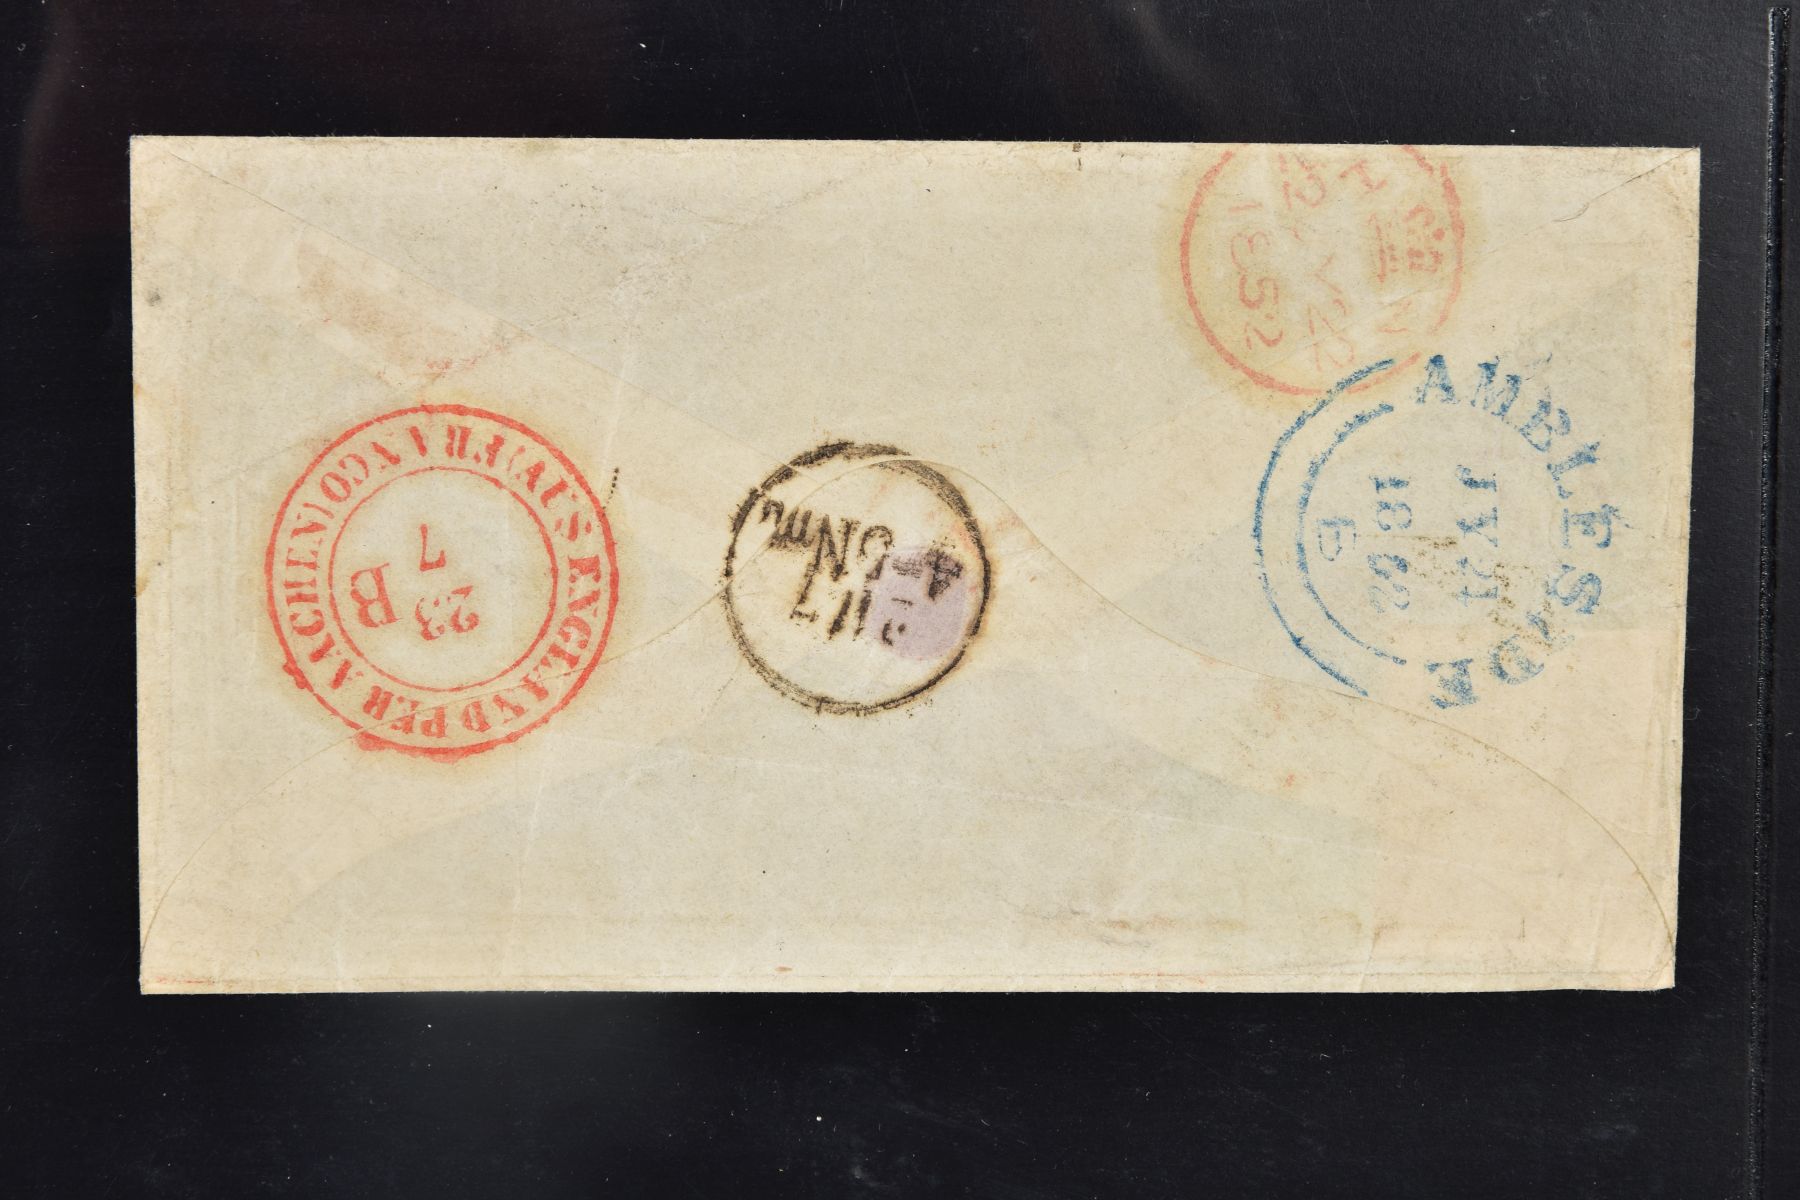 GB 1848 10d EMBOSSED on cover to Berlin, cut into at right - Image 3 of 4